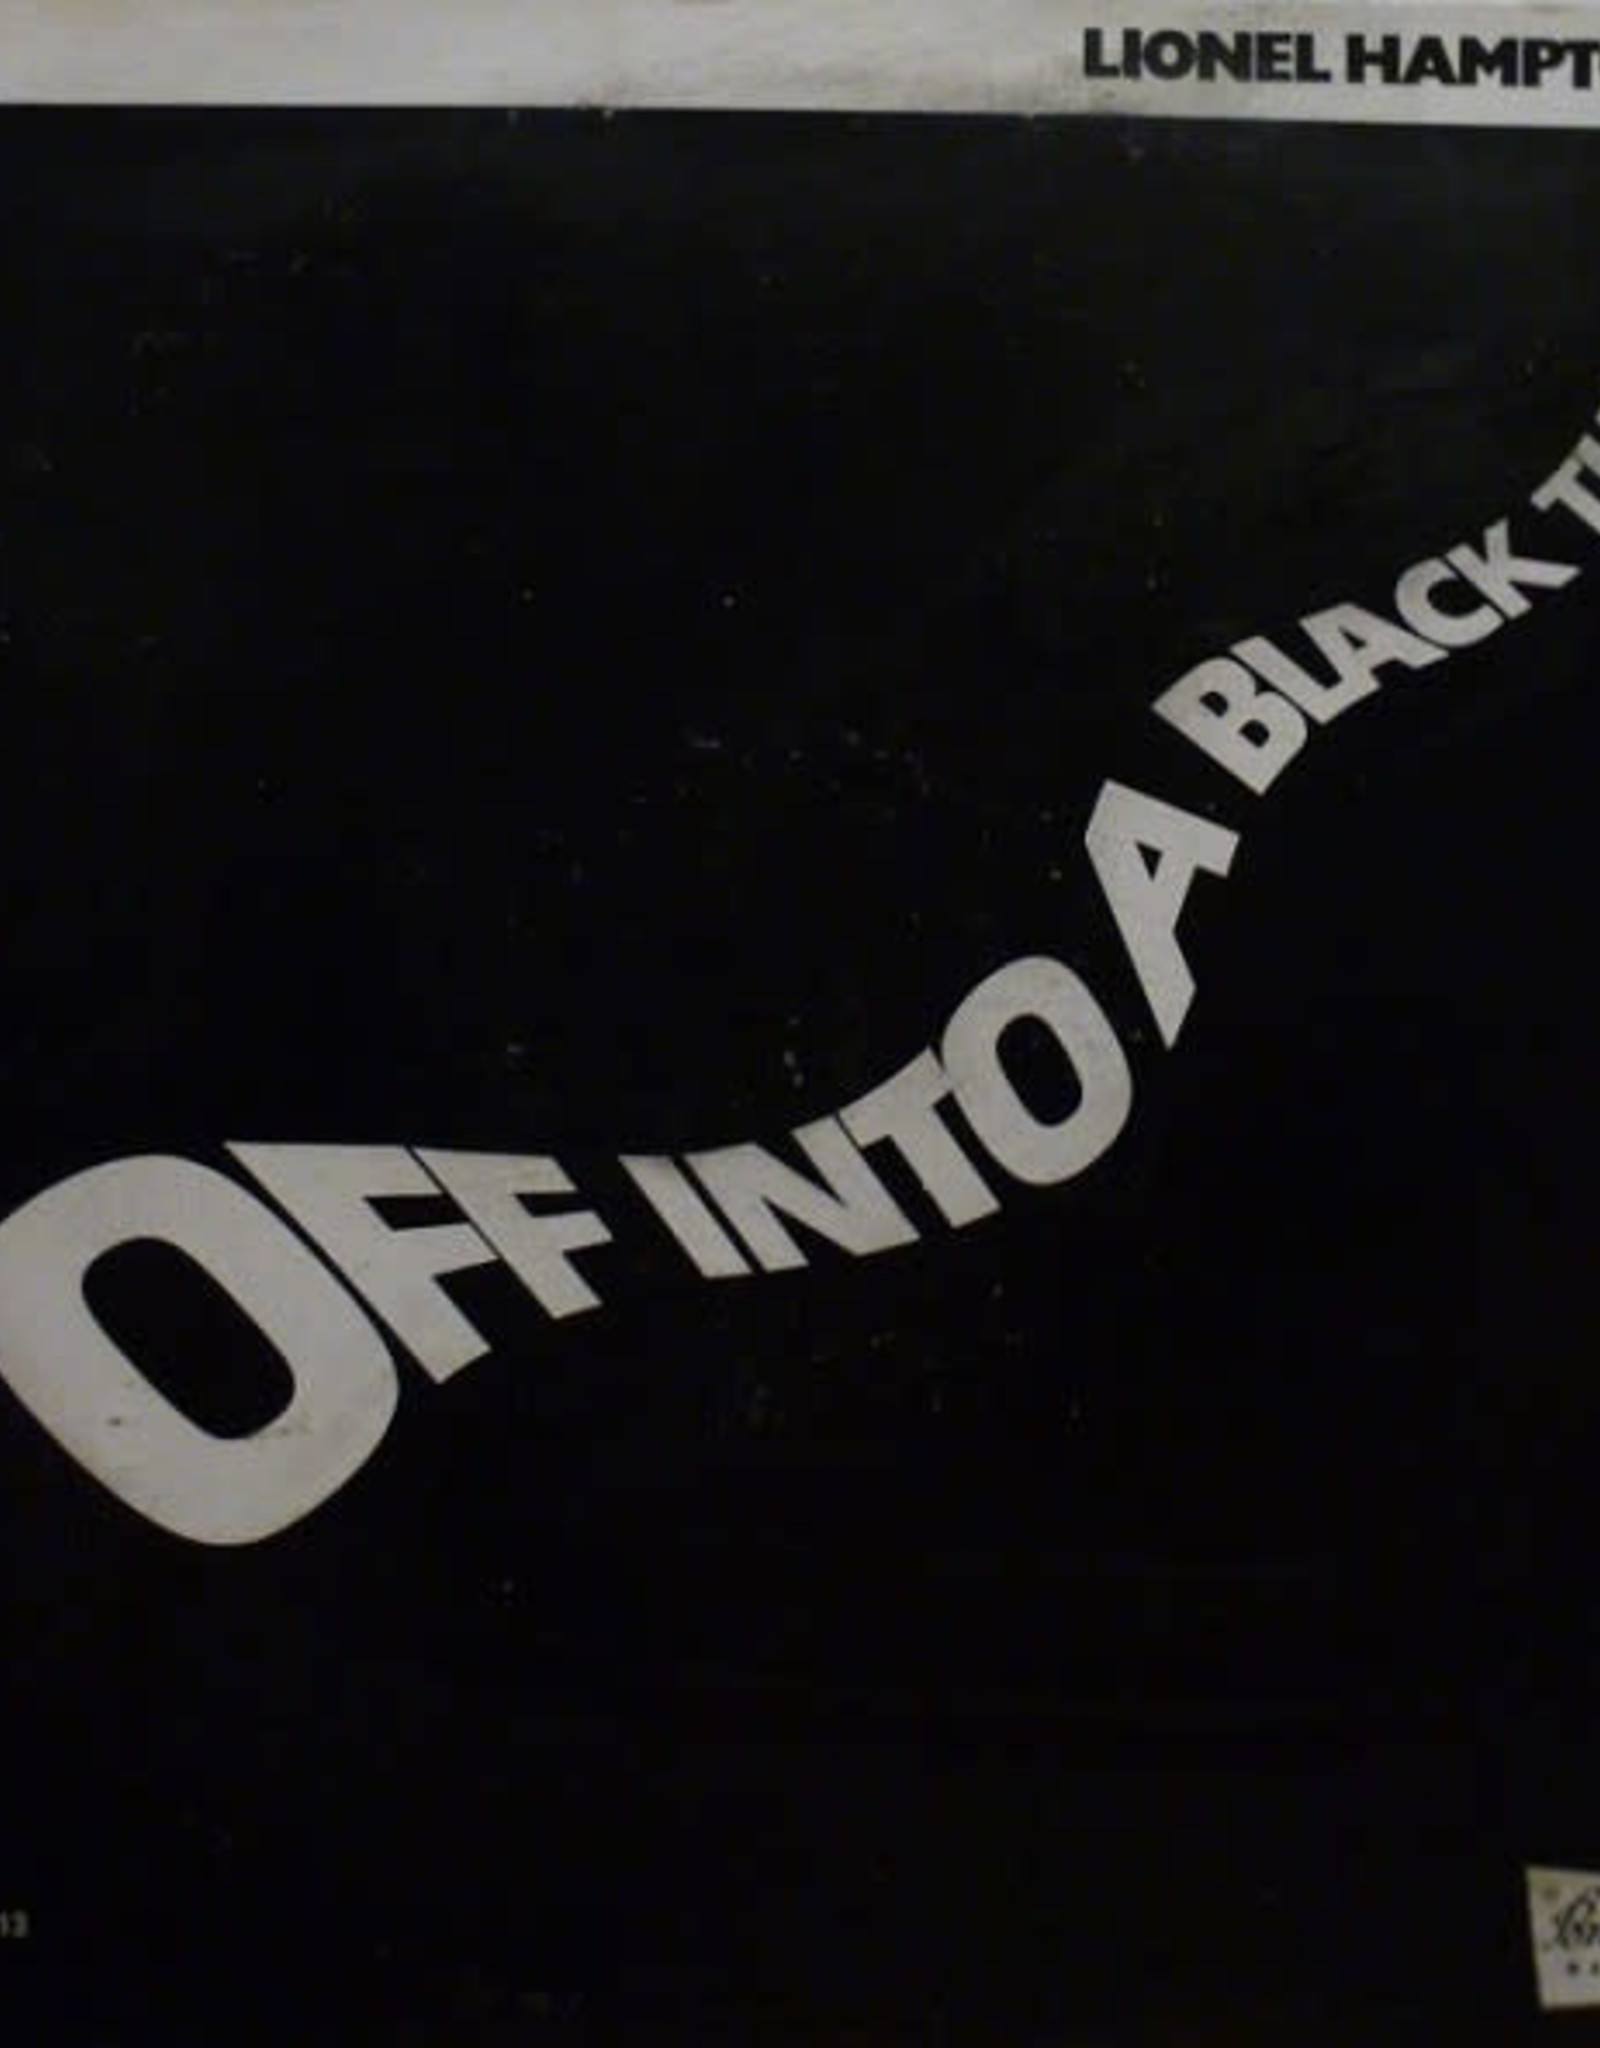 Lionel Hampton - Off Into a Black Thing